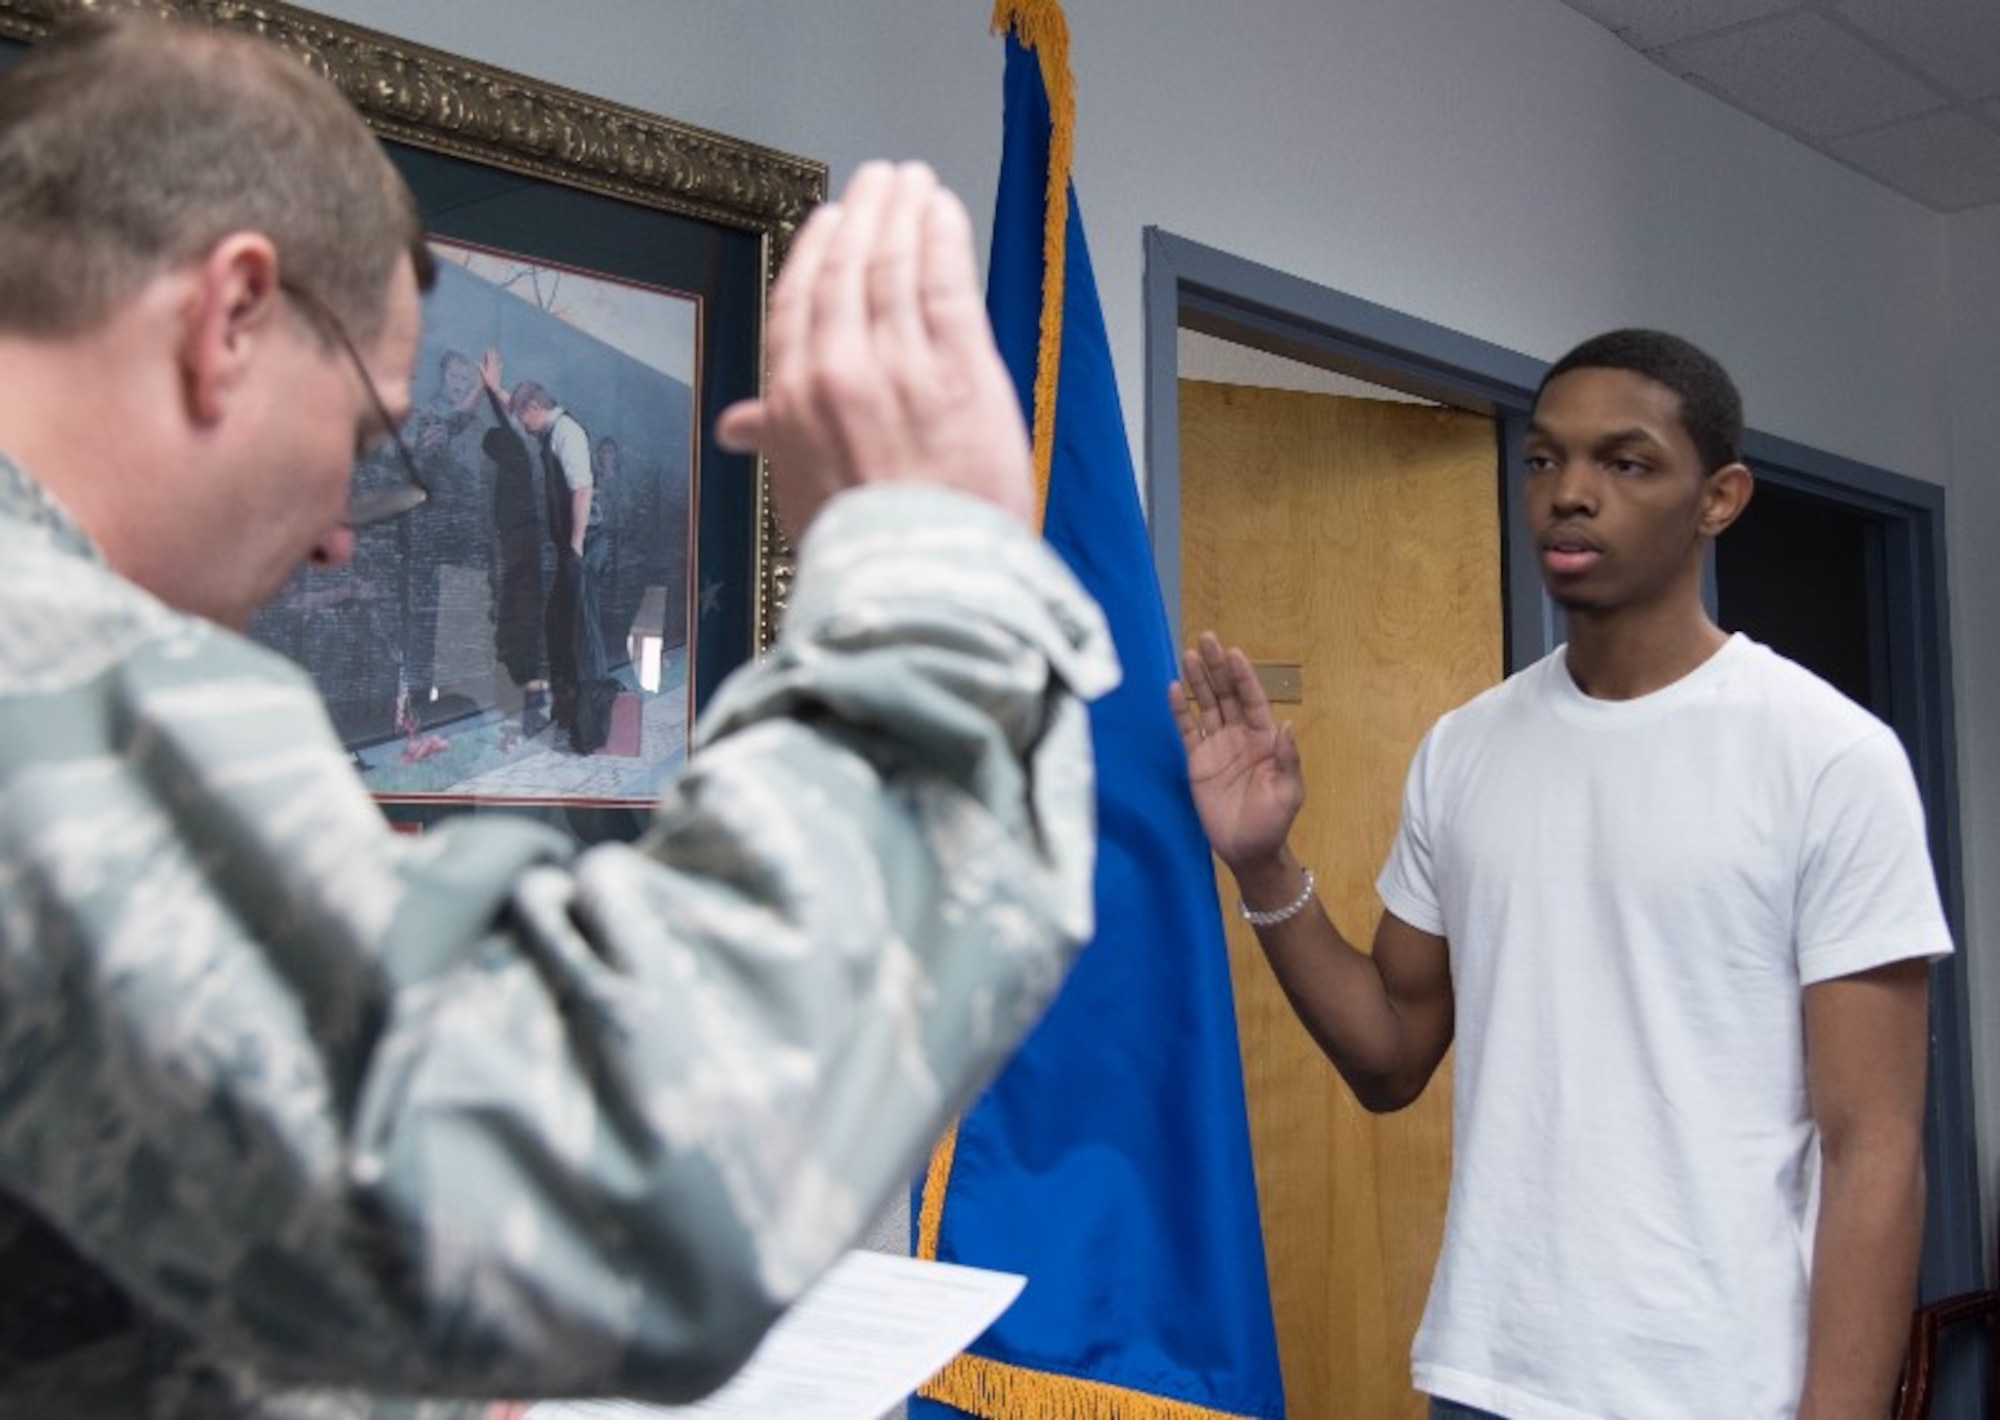 Jaquan Helton, new Air Force Reserve recruit from New Orleans, swears the oath of enlistment at the Air Force Reserve recruiting office on Keesler Air Force Base Aug. 18. (U.S. Air Force photo/Senior Airman Heather Heiney)